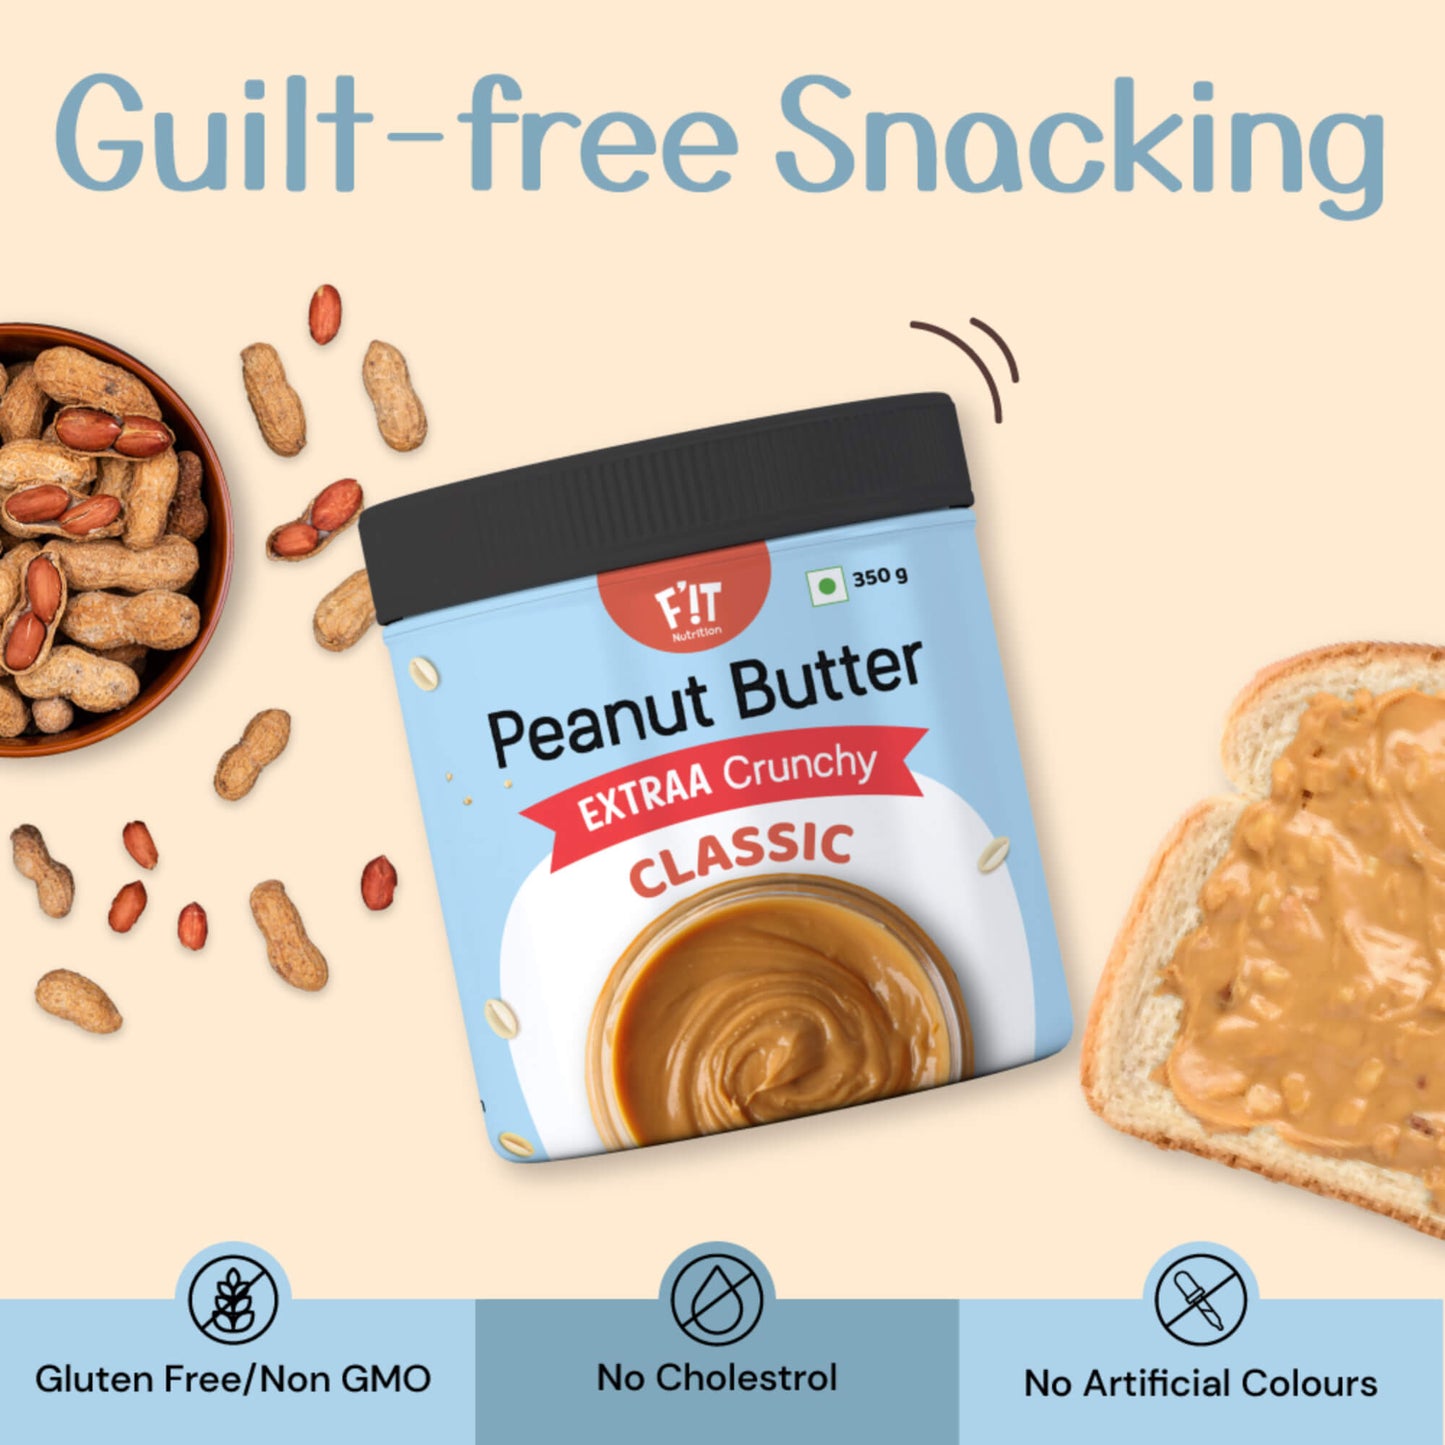 Classic Peanut Butter EXTRAA Crunchy | Rich in Protein | Gluten Free | 350g